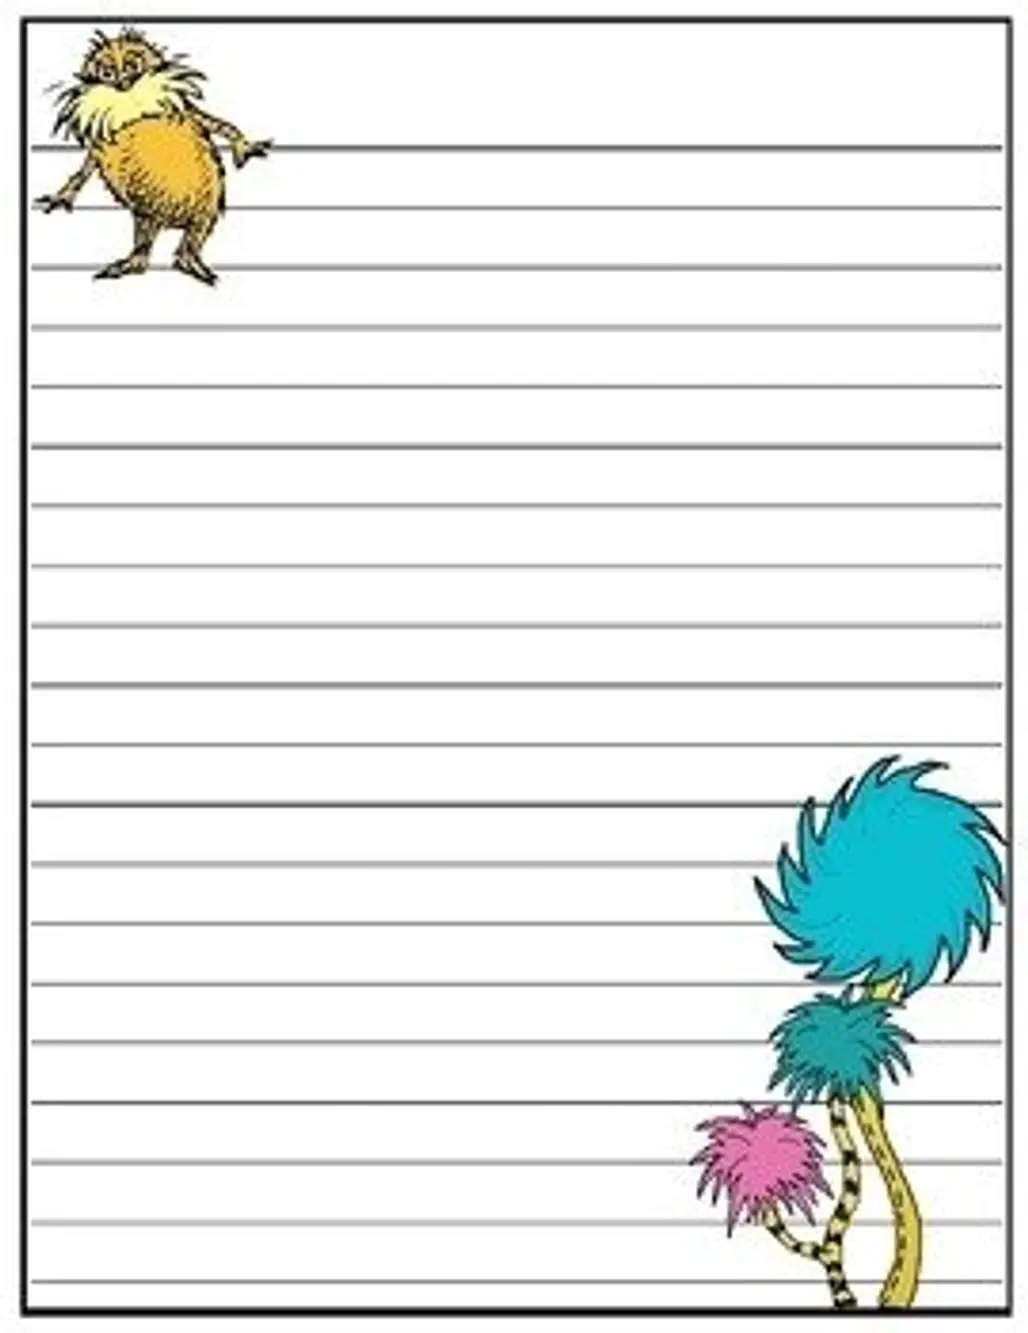 Dr. Seuss Writing Papers